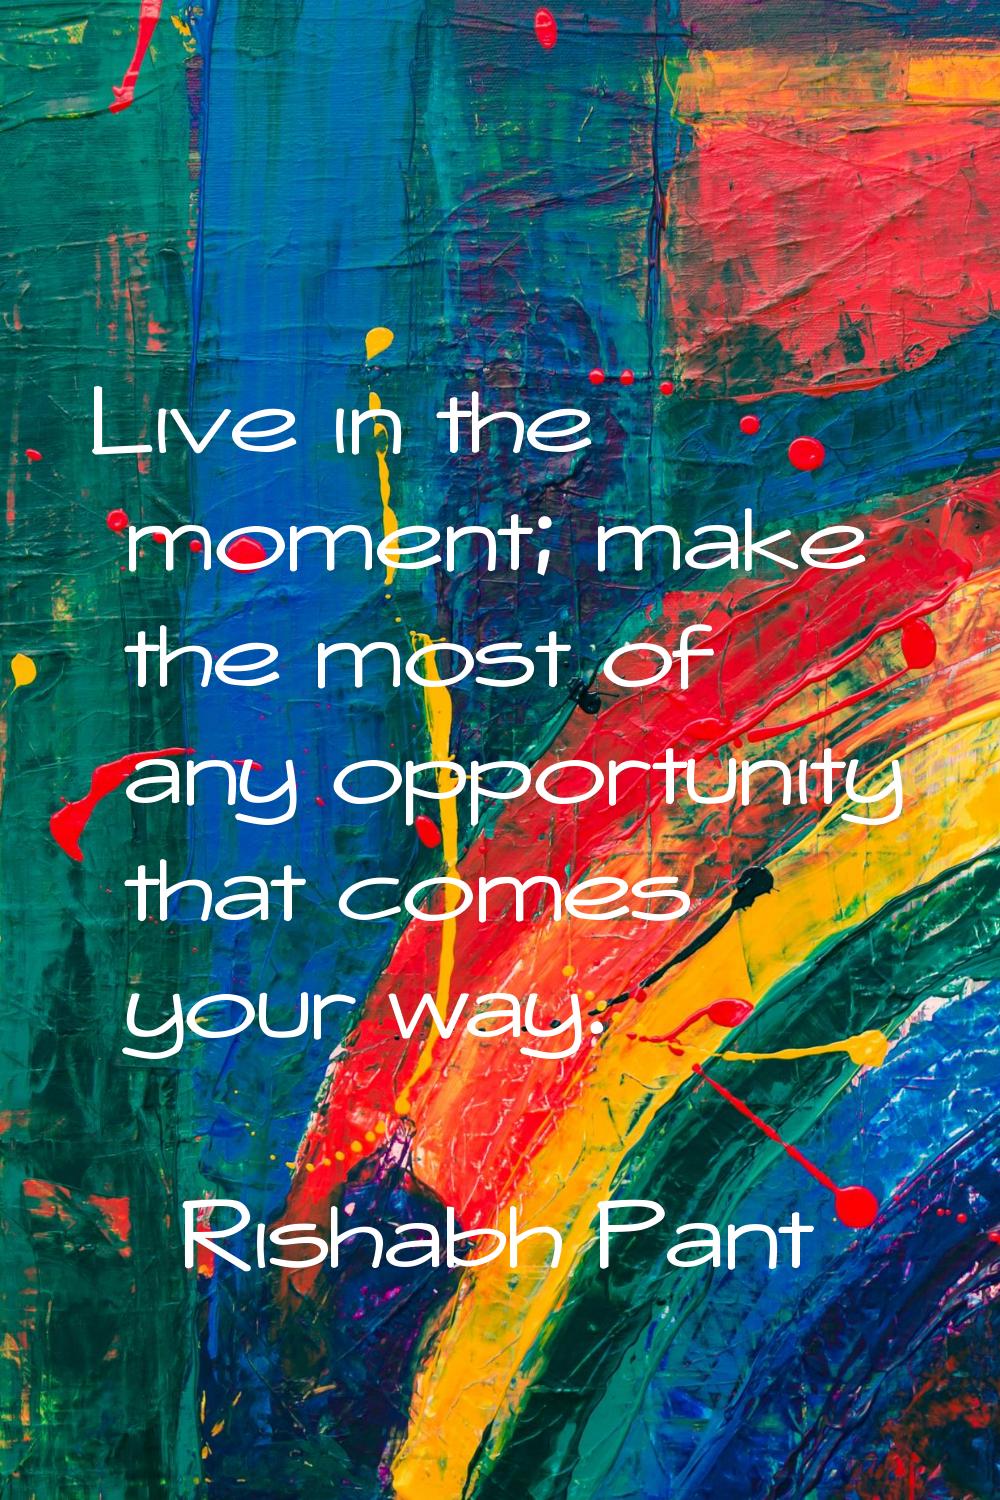 Live in the moment; make the most of any opportunity that comes your way.